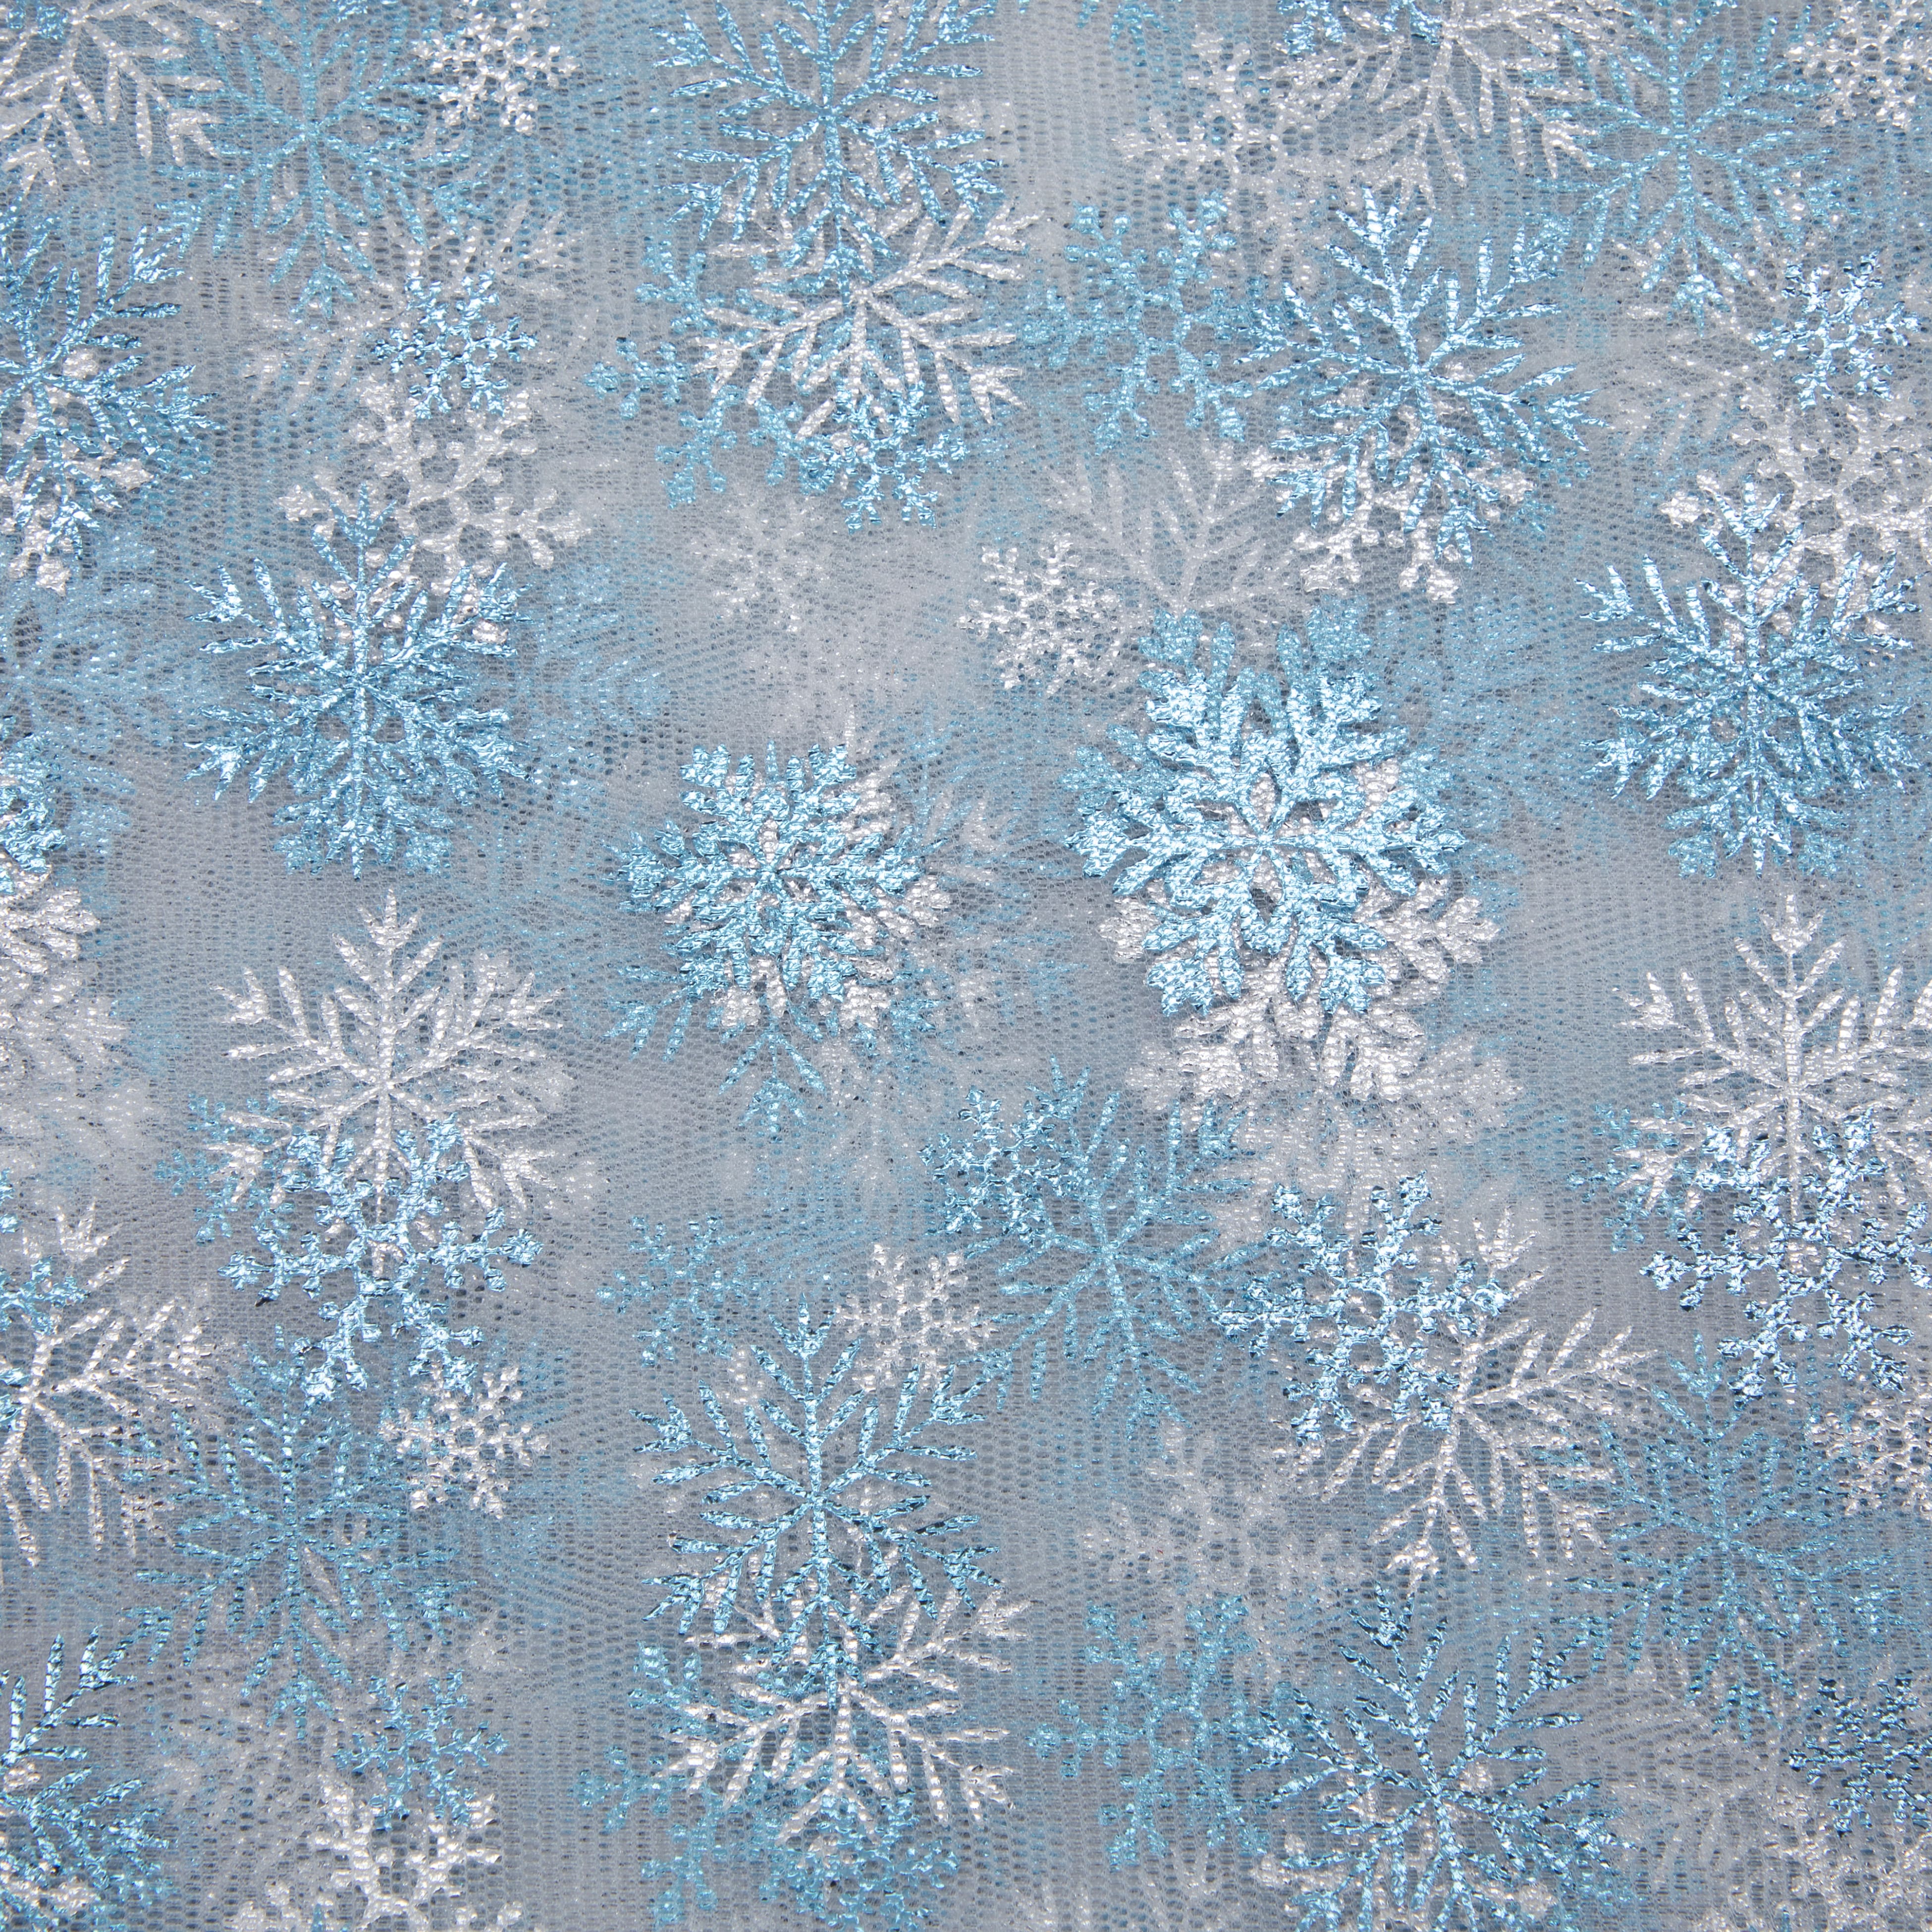 White Mesh with Blue Snowflakes Polyester Fabric